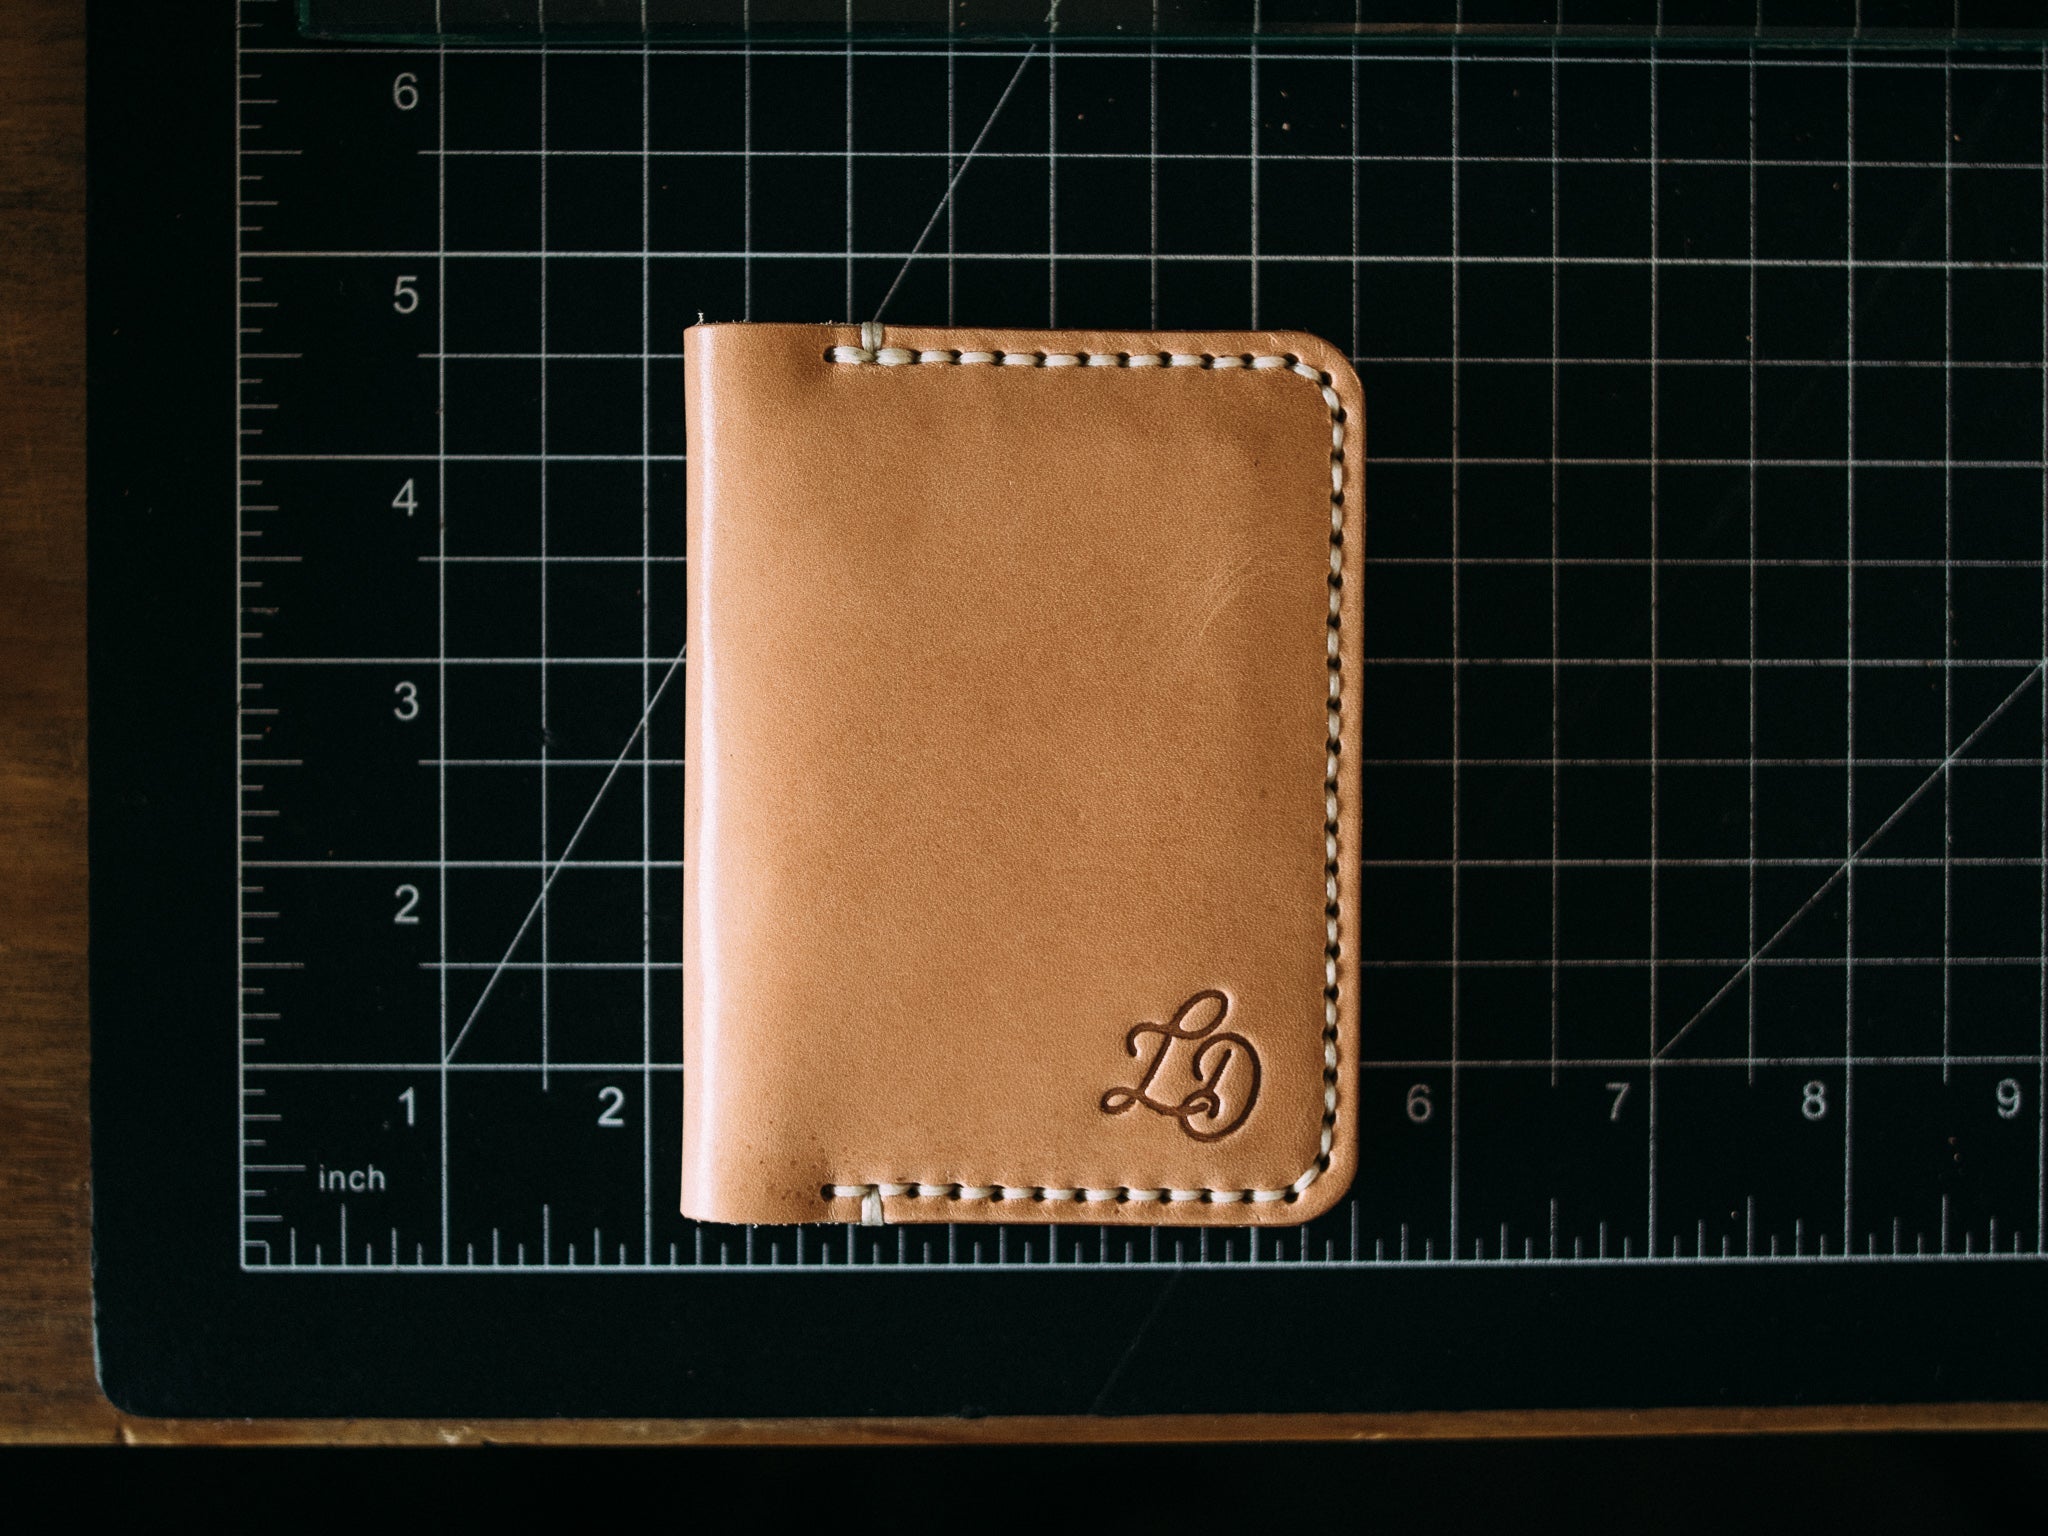 The Dutchman - Lost Dutchman Leather handmade leather wallets